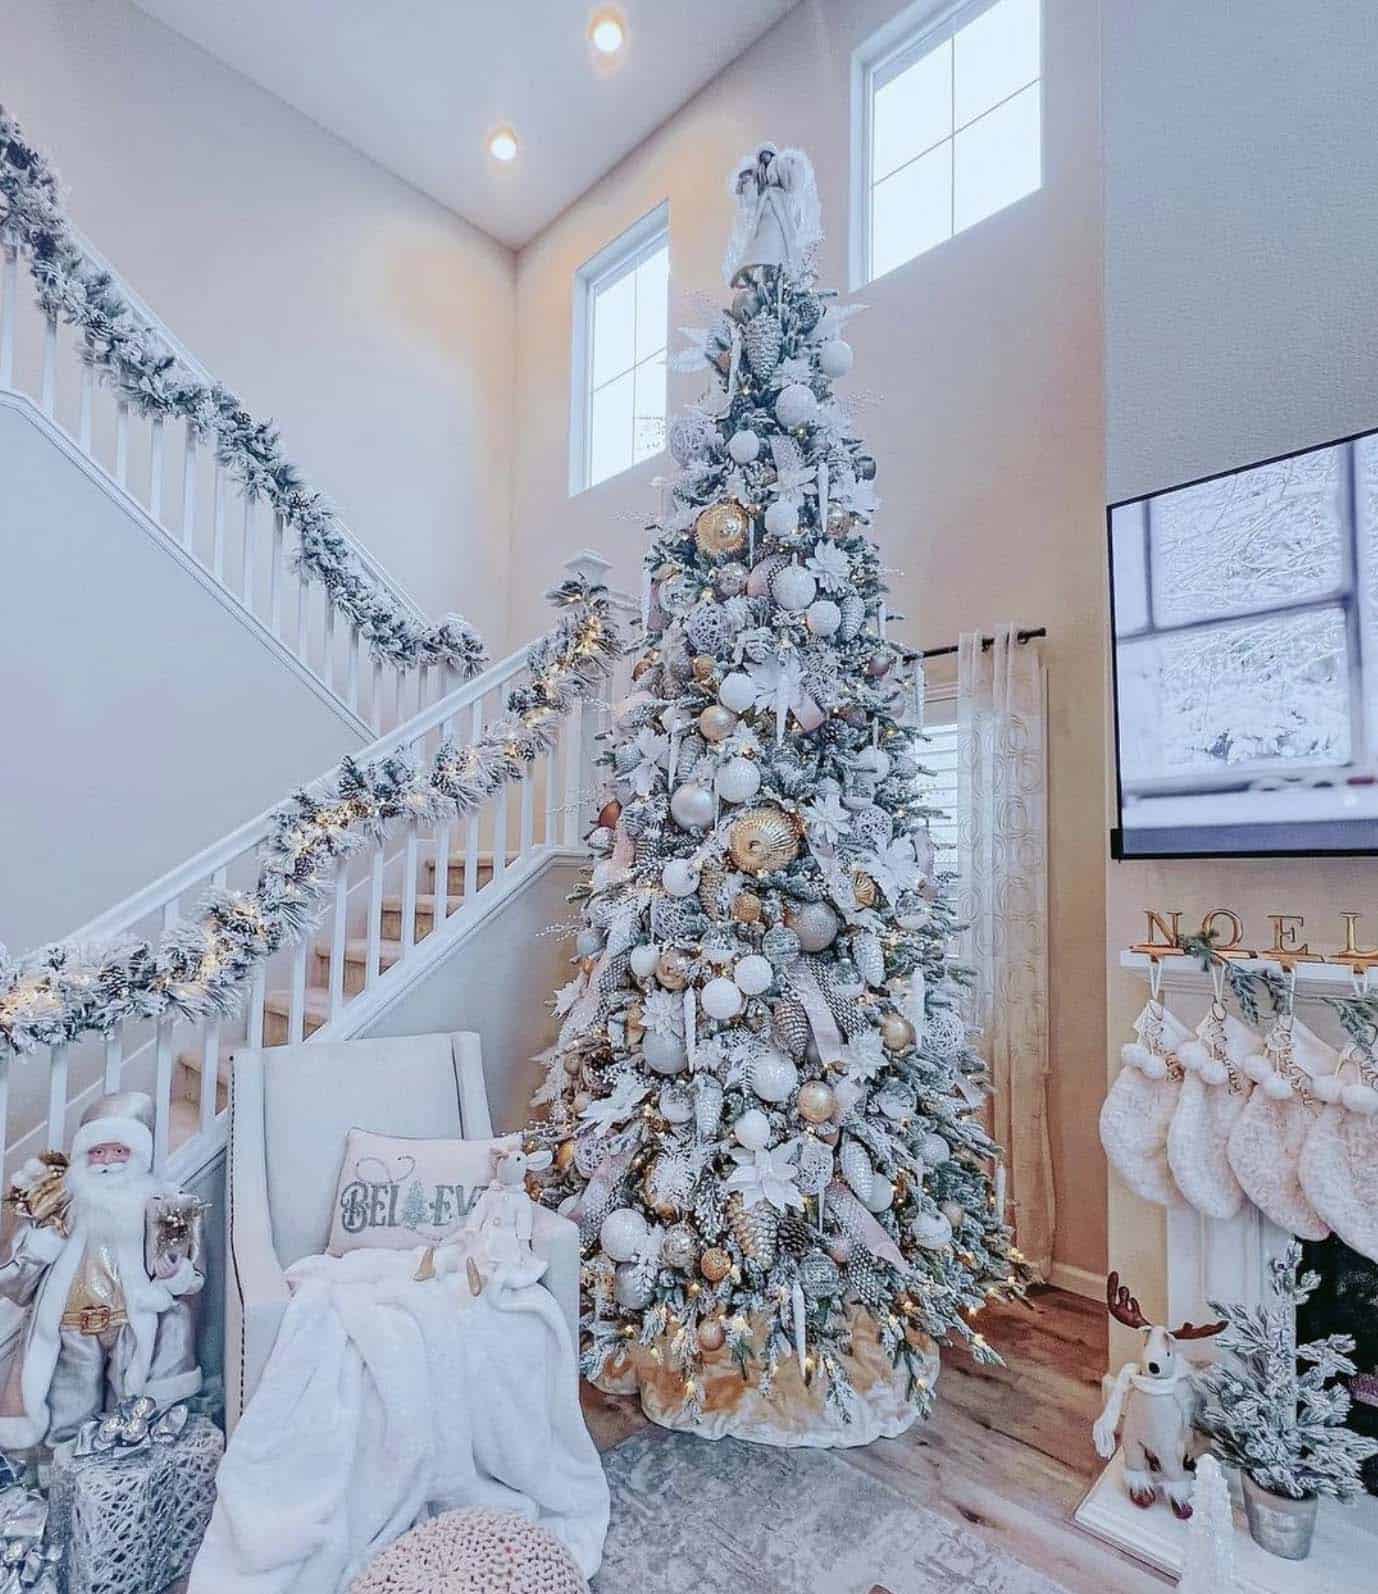 25 White Christmas Decorating Ideas To Make Your Home Sparkle